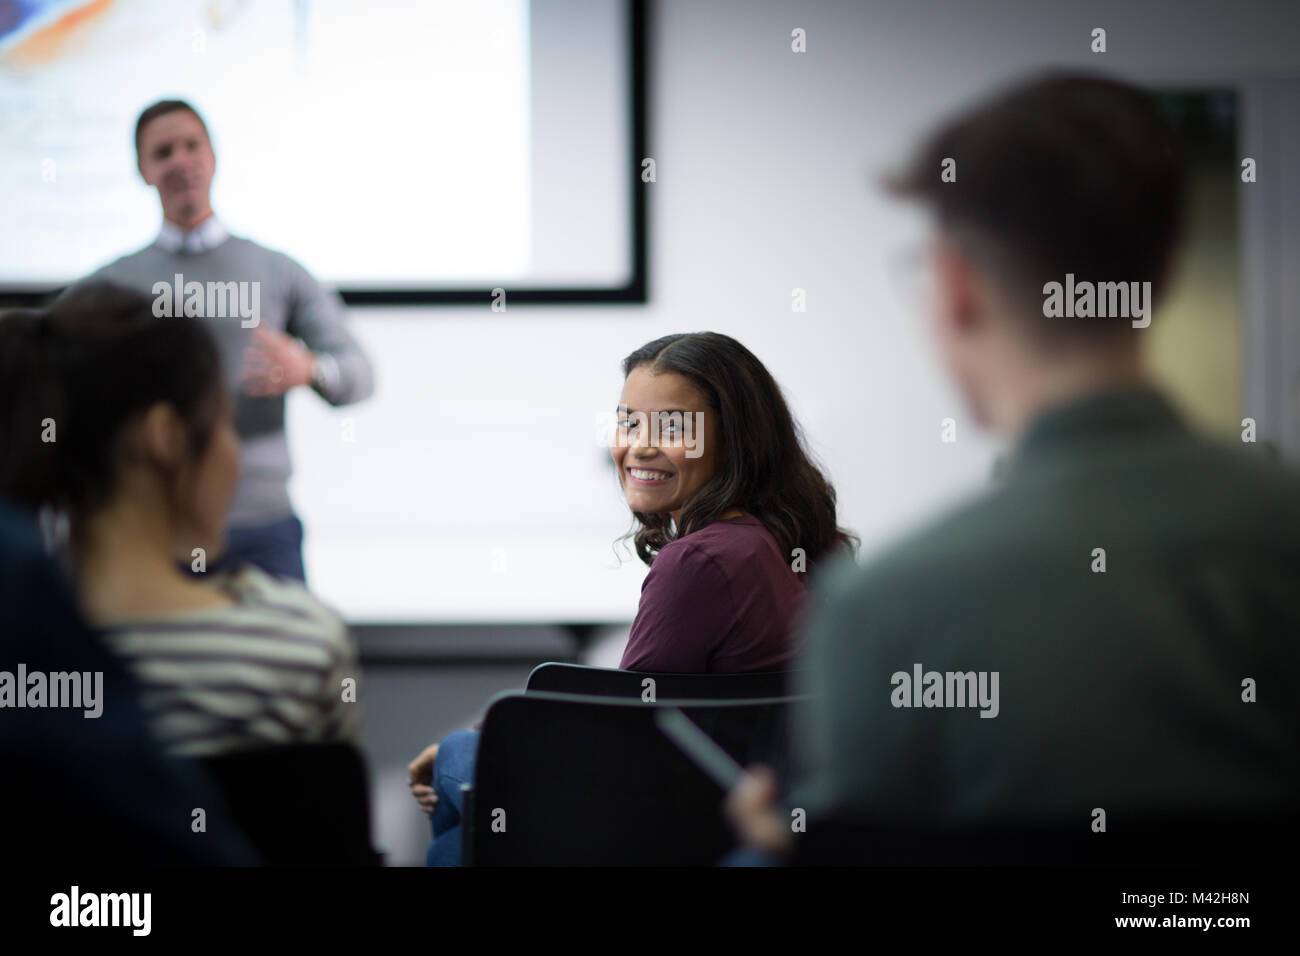 Smiling student at a lecture Stock Photo